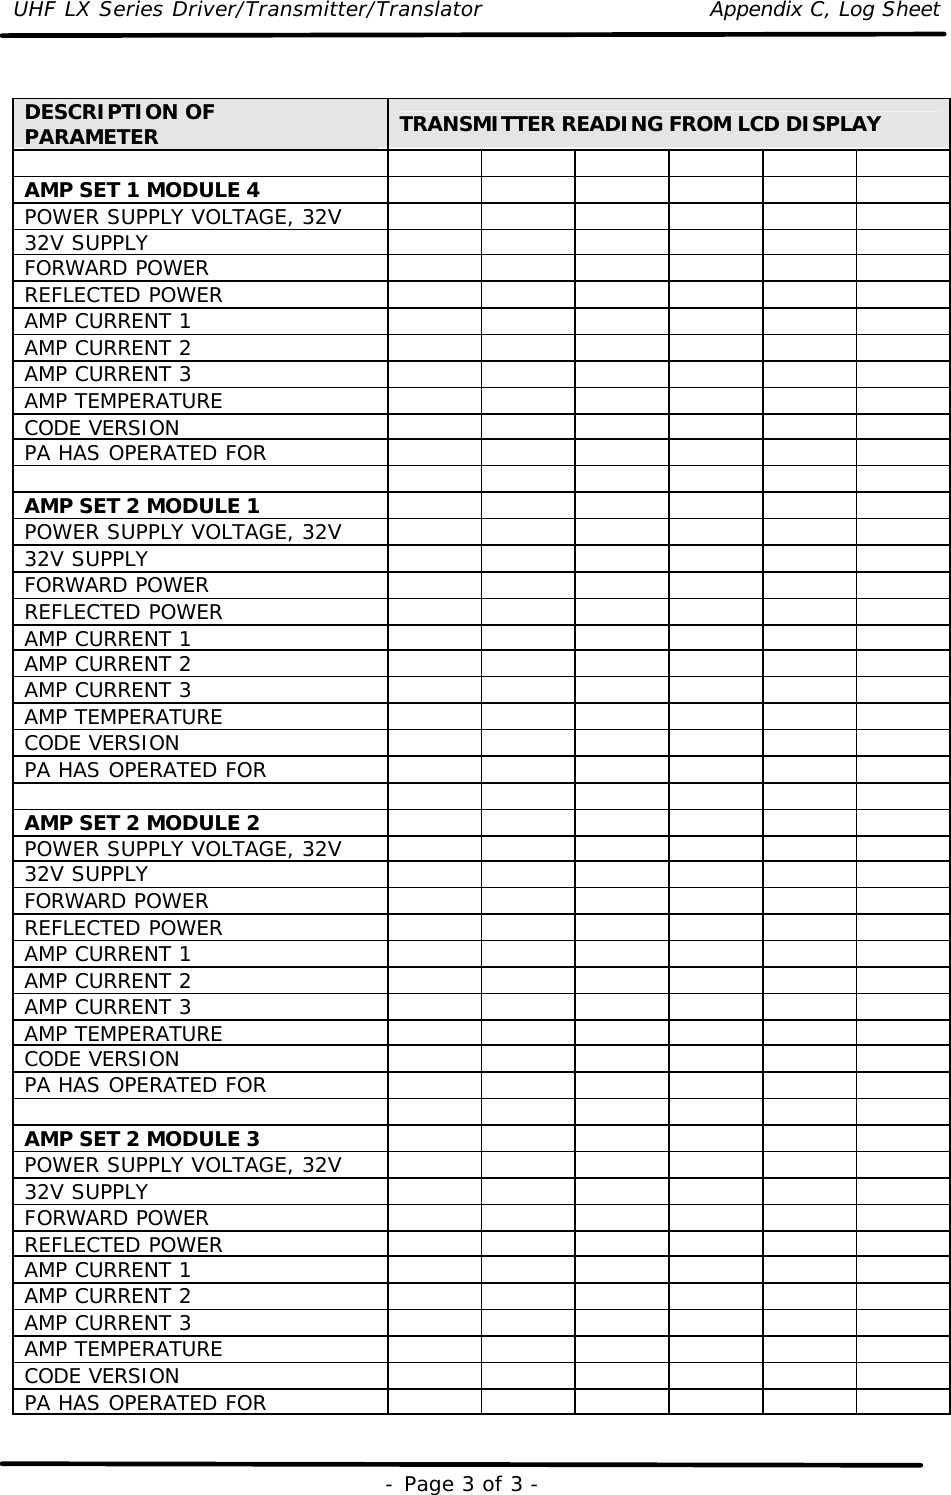 UHF LX Series Driver/Transmitter/Translator Appendix C, Log Sheet   - Page 3 of 3 -  DESCRIPTION OF PARAMETER TRANSMITTER READING FROM LCD DISPLAY         AMP SET 1 MODULE 4       POWER SUPPLY VOLTAGE, 32V       32V SUPPLY        FORWARD POWER        REFLECTED POWER        AMP CURRENT 1        AMP CURRENT 2        AMP CURRENT 3        AMP TEMPERATURE        CODE VERSION        PA HAS OPERATED FOR                AMP SET 2 MODULE 1       POWER SUPPLY VOLTAGE, 32V       32V SUPPLY        FORWARD POWER        REFLECTED POWER        AMP CURRENT 1        AMP CURRENT 2        AMP CURRENT 3        AMP TEMPERATURE        CODE VERSION        PA HAS OPERATED FOR                AMP SET 2 MODULE 2       POWER SUPPLY VOLTAGE, 32V       32V SUPPLY        FORWARD POWER        REFLECTED POWER        AMP CURRENT 1        AMP CURRENT 2        AMP CURRENT 3        AMP TEMPERATURE        CODE VERSION        PA HAS OPERATED FOR                AMP SET 2 MODULE 3       POWER SUPPLY VOLTAGE, 32V       32V SUPPLY        FORWARD POWER        REFLECTED POWER        AMP CURRENT 1        AMP CURRENT 2        AMP CURRENT 3        AMP TEMPERATURE        CODE VERSION        PA HAS OPERATED FOR        